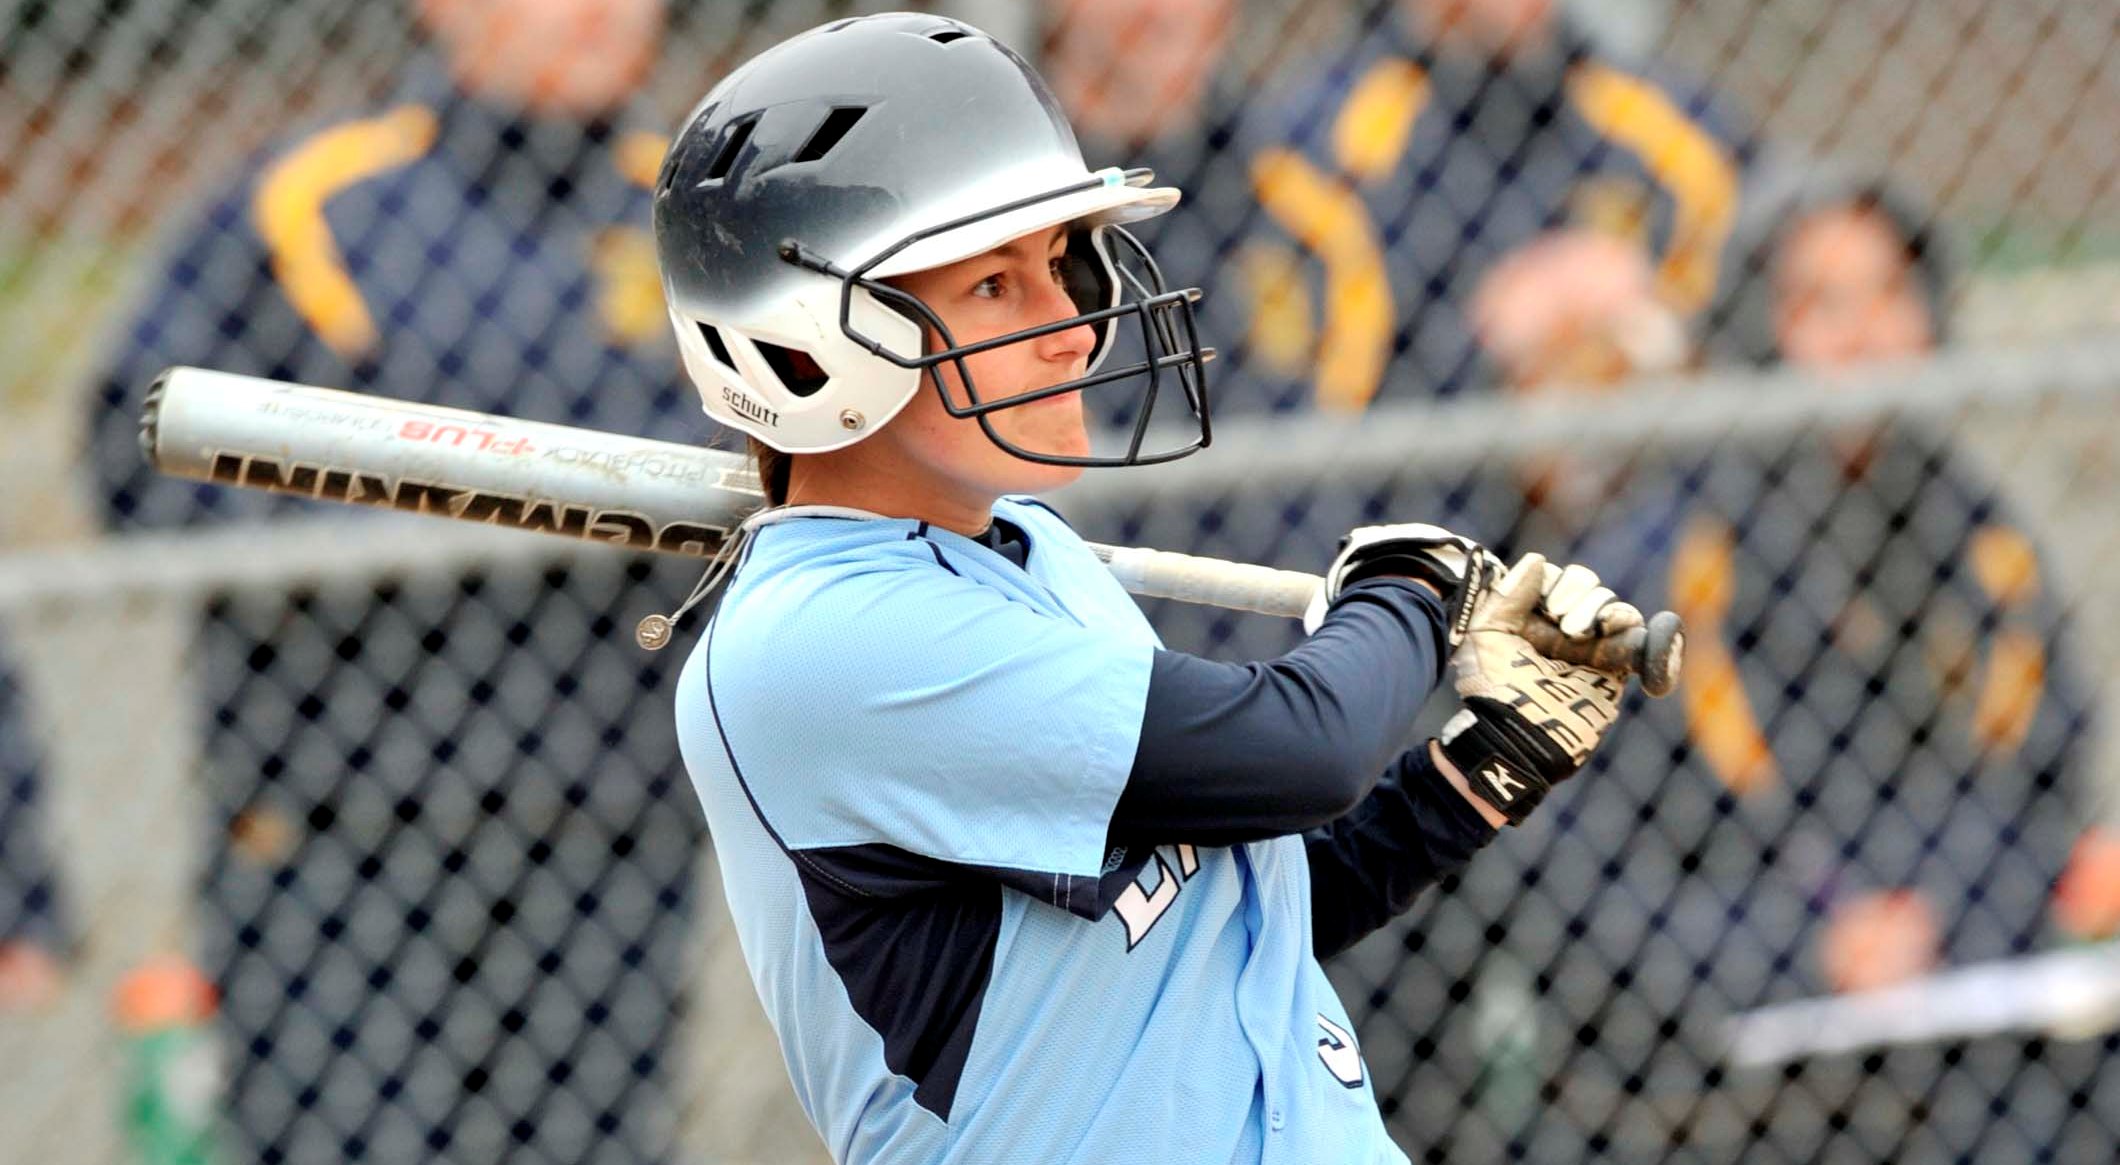 Falcons Power Past Lasell in Softball Doubleheader